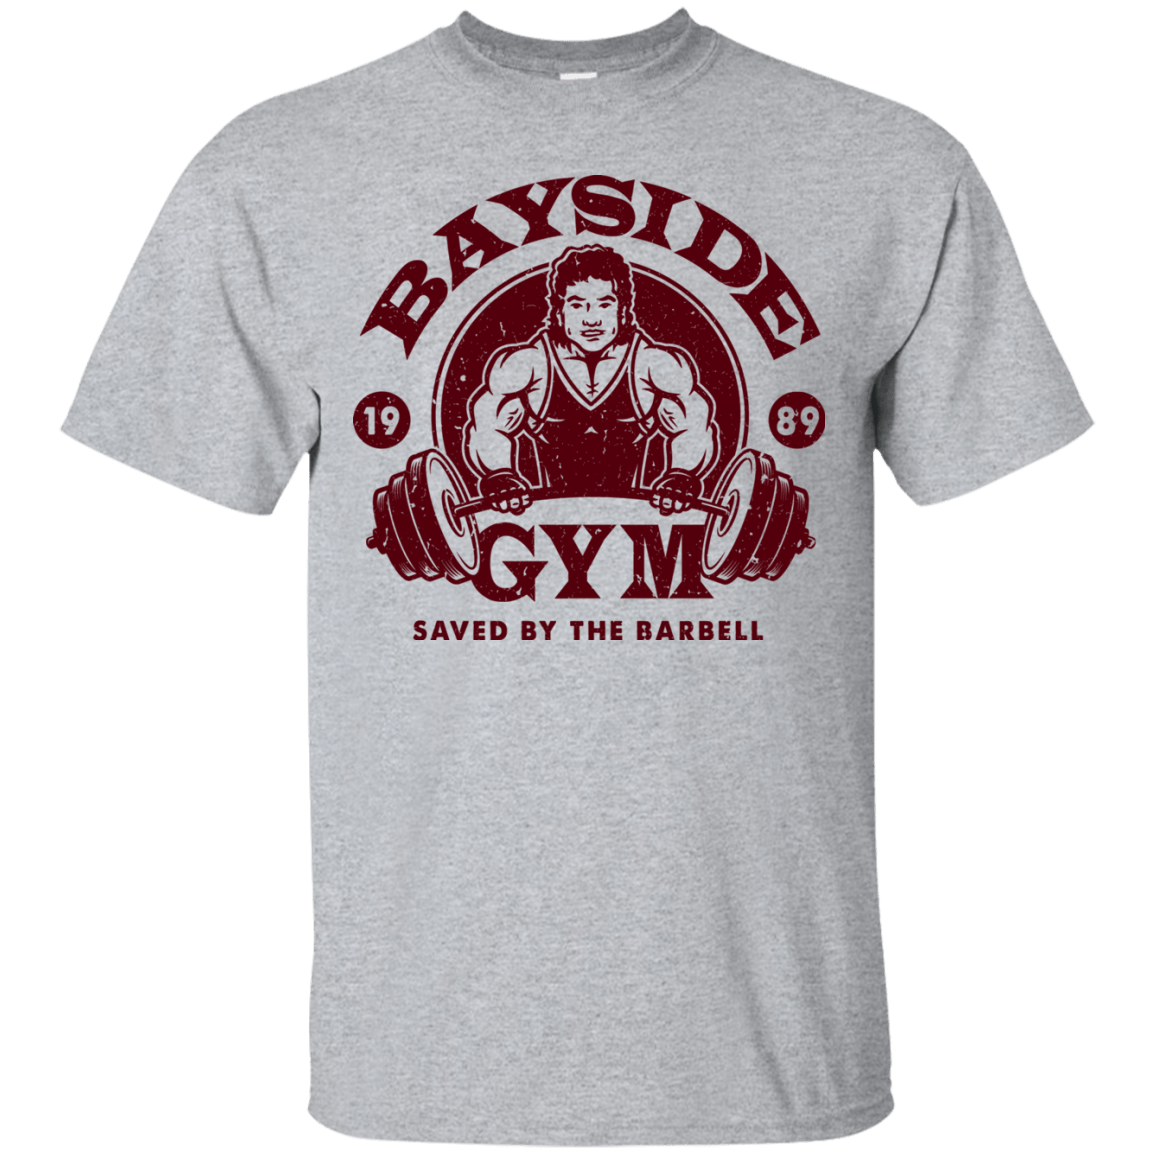 T-Shirts Sport Grey / Small SAVED BY THE BARBELL T-Shirt